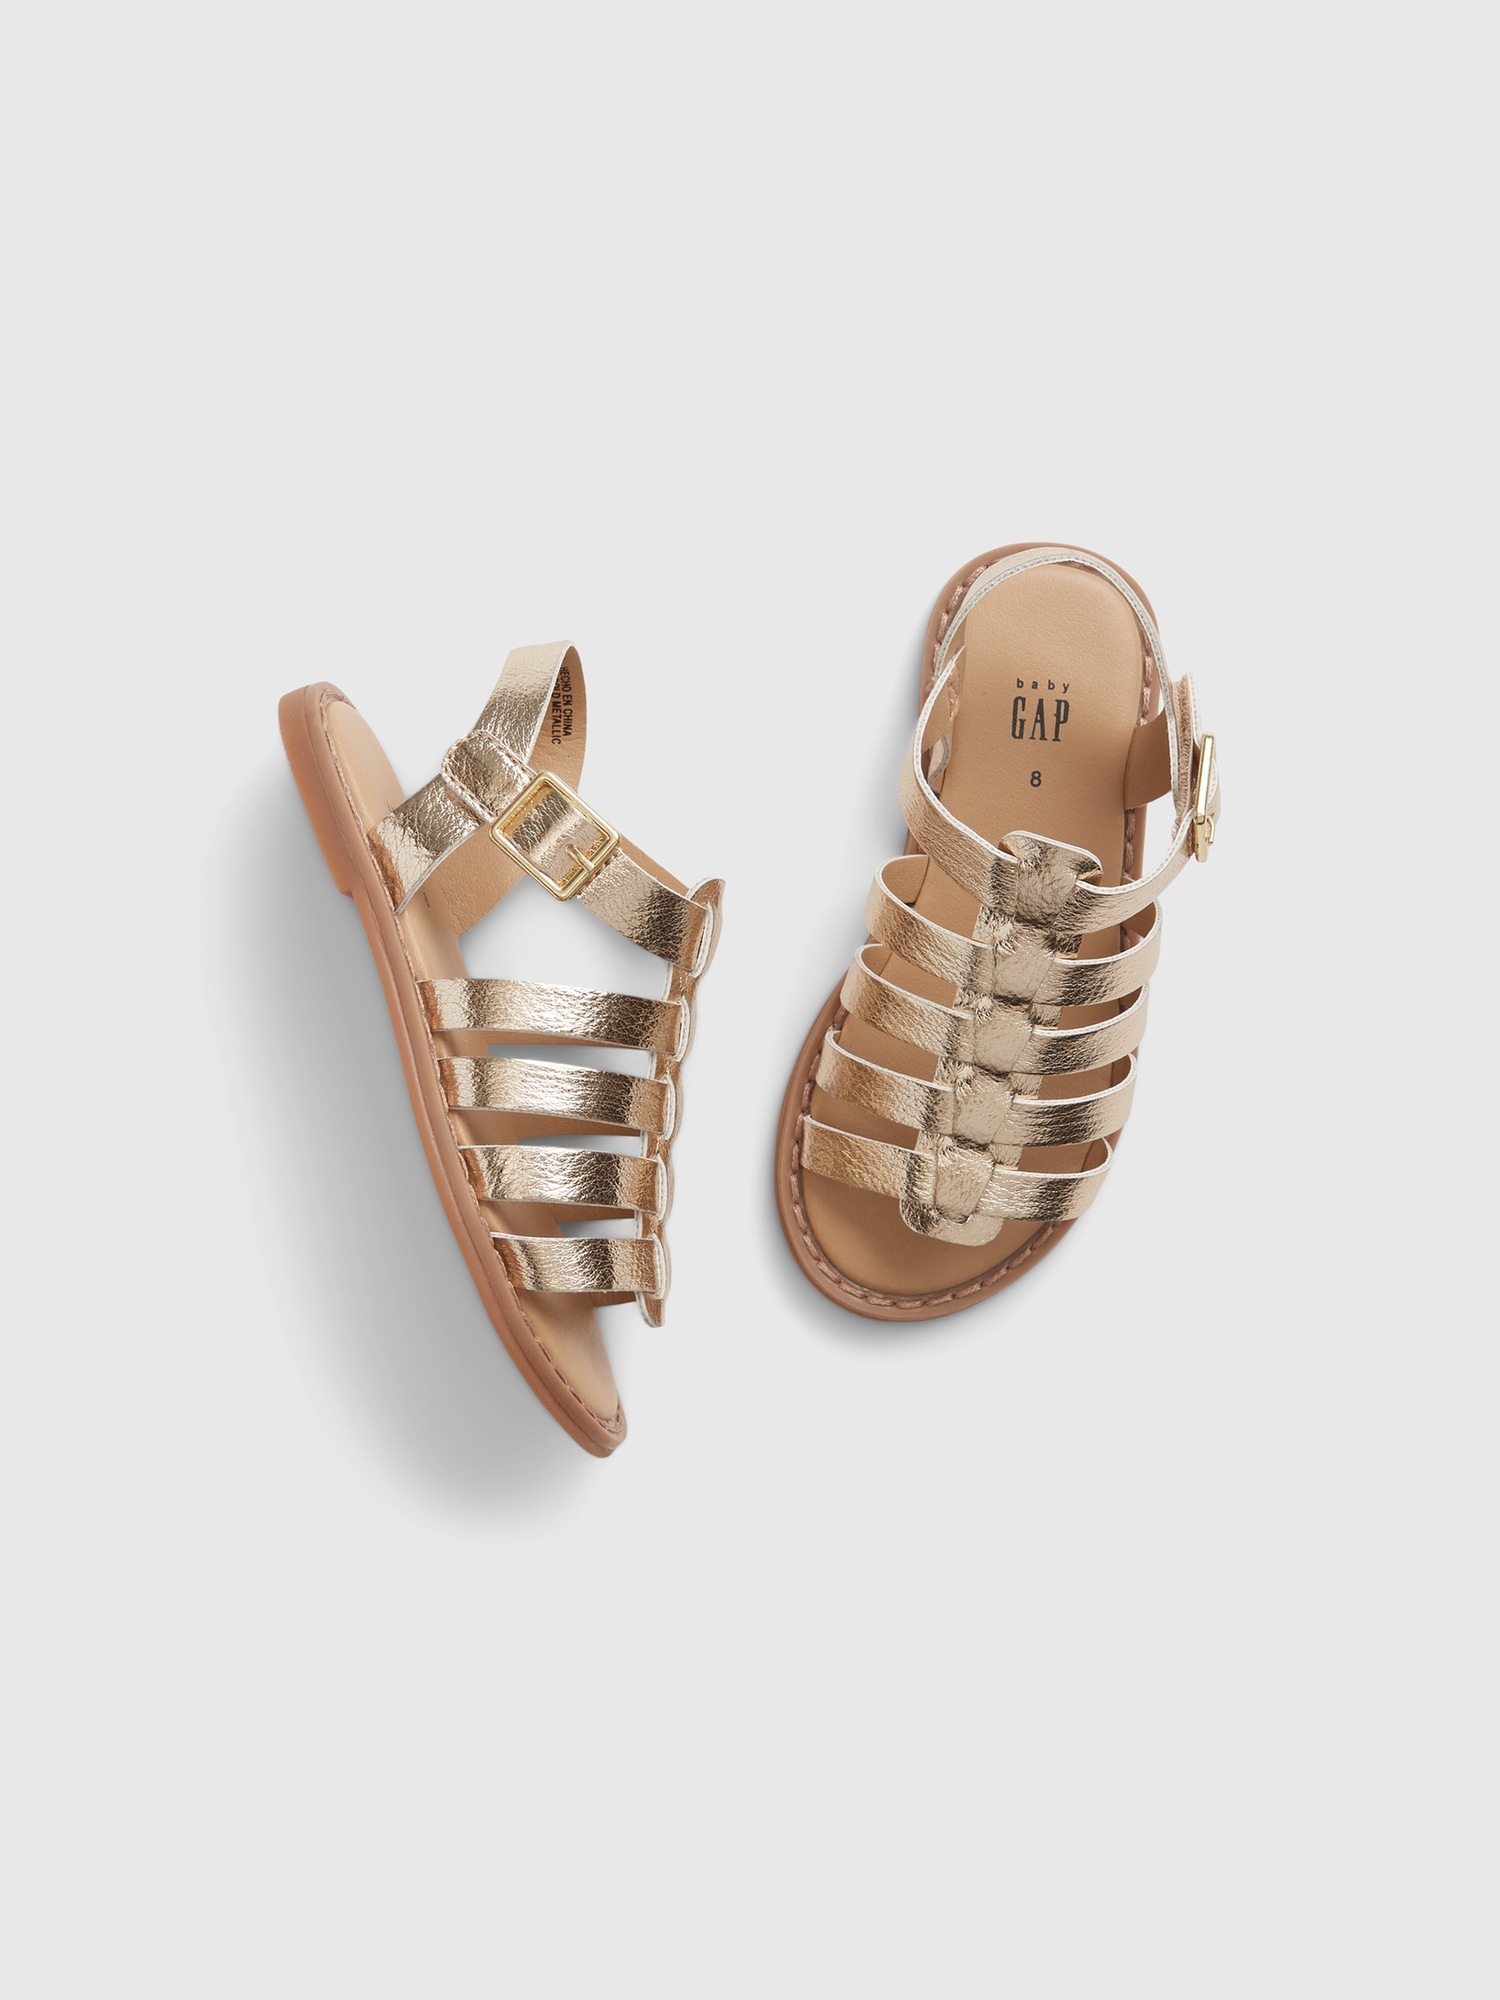 Gap Toddler Strappy Sandals gold. 1